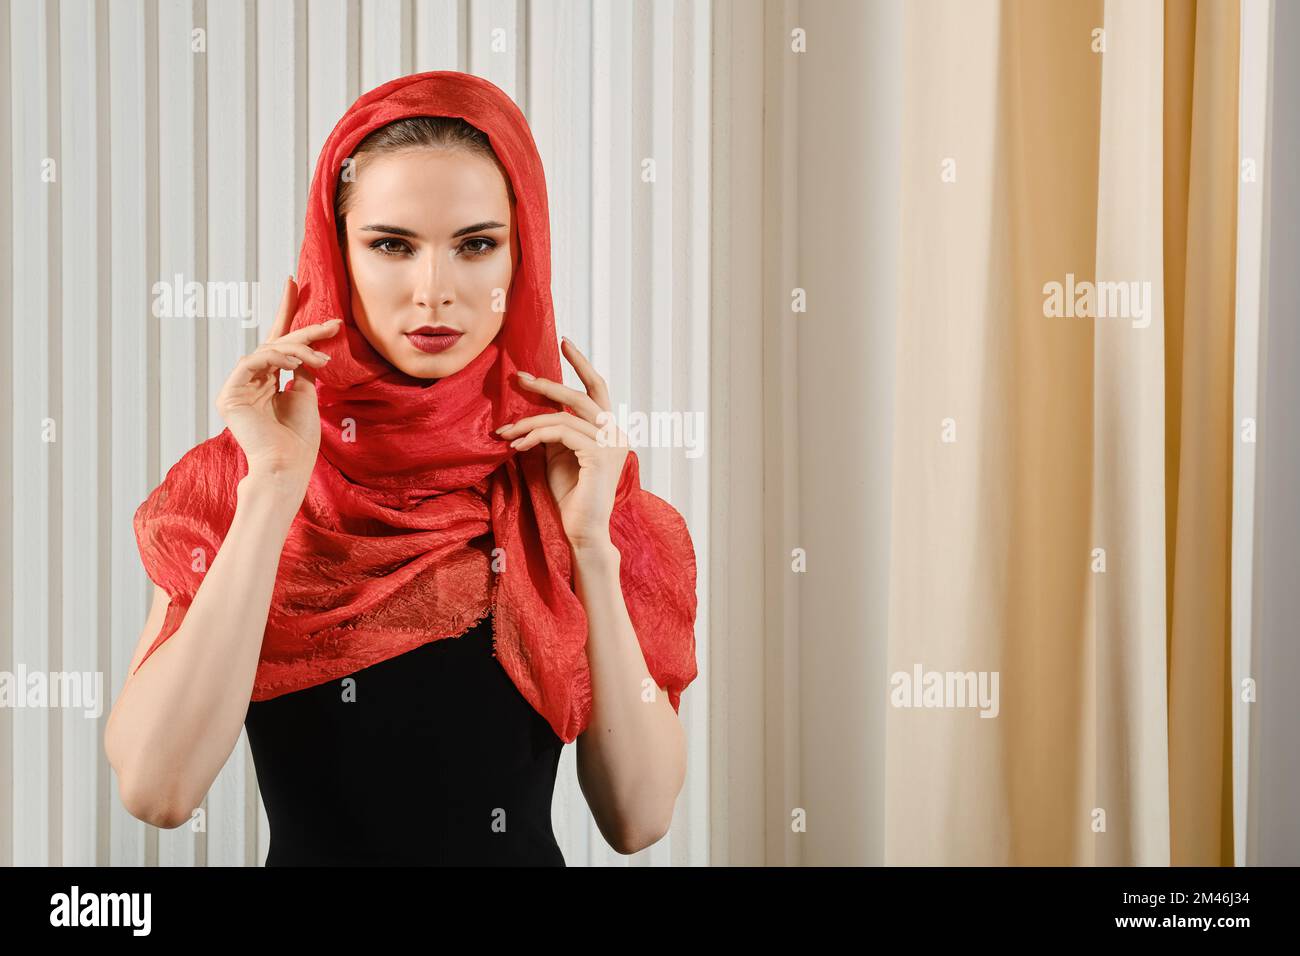 Classy woman in red silk headscarf wrapped around her head and piercing gaze Stock Photo